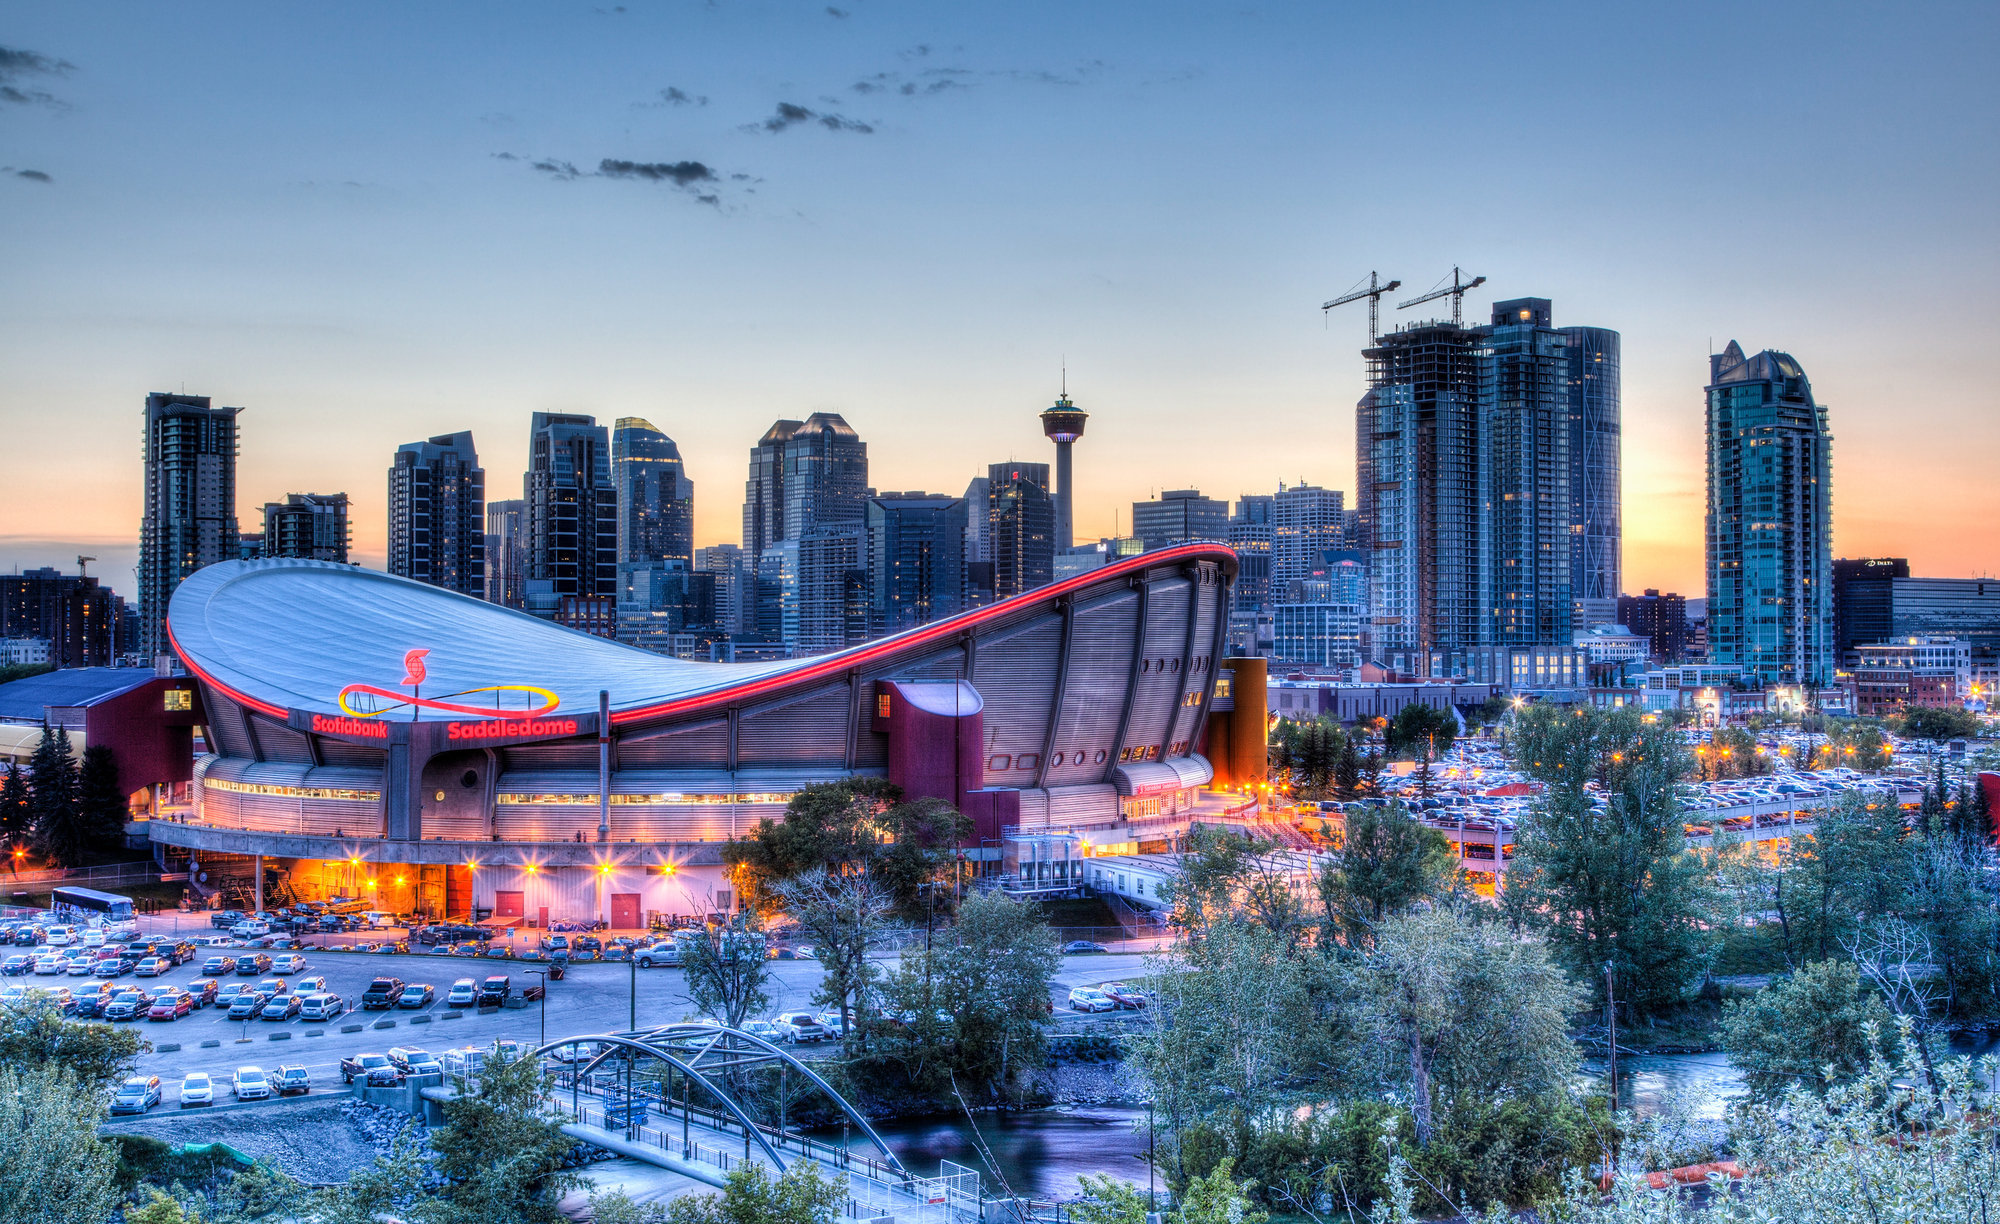 The Calgary saddledome with downtown highrises in the background